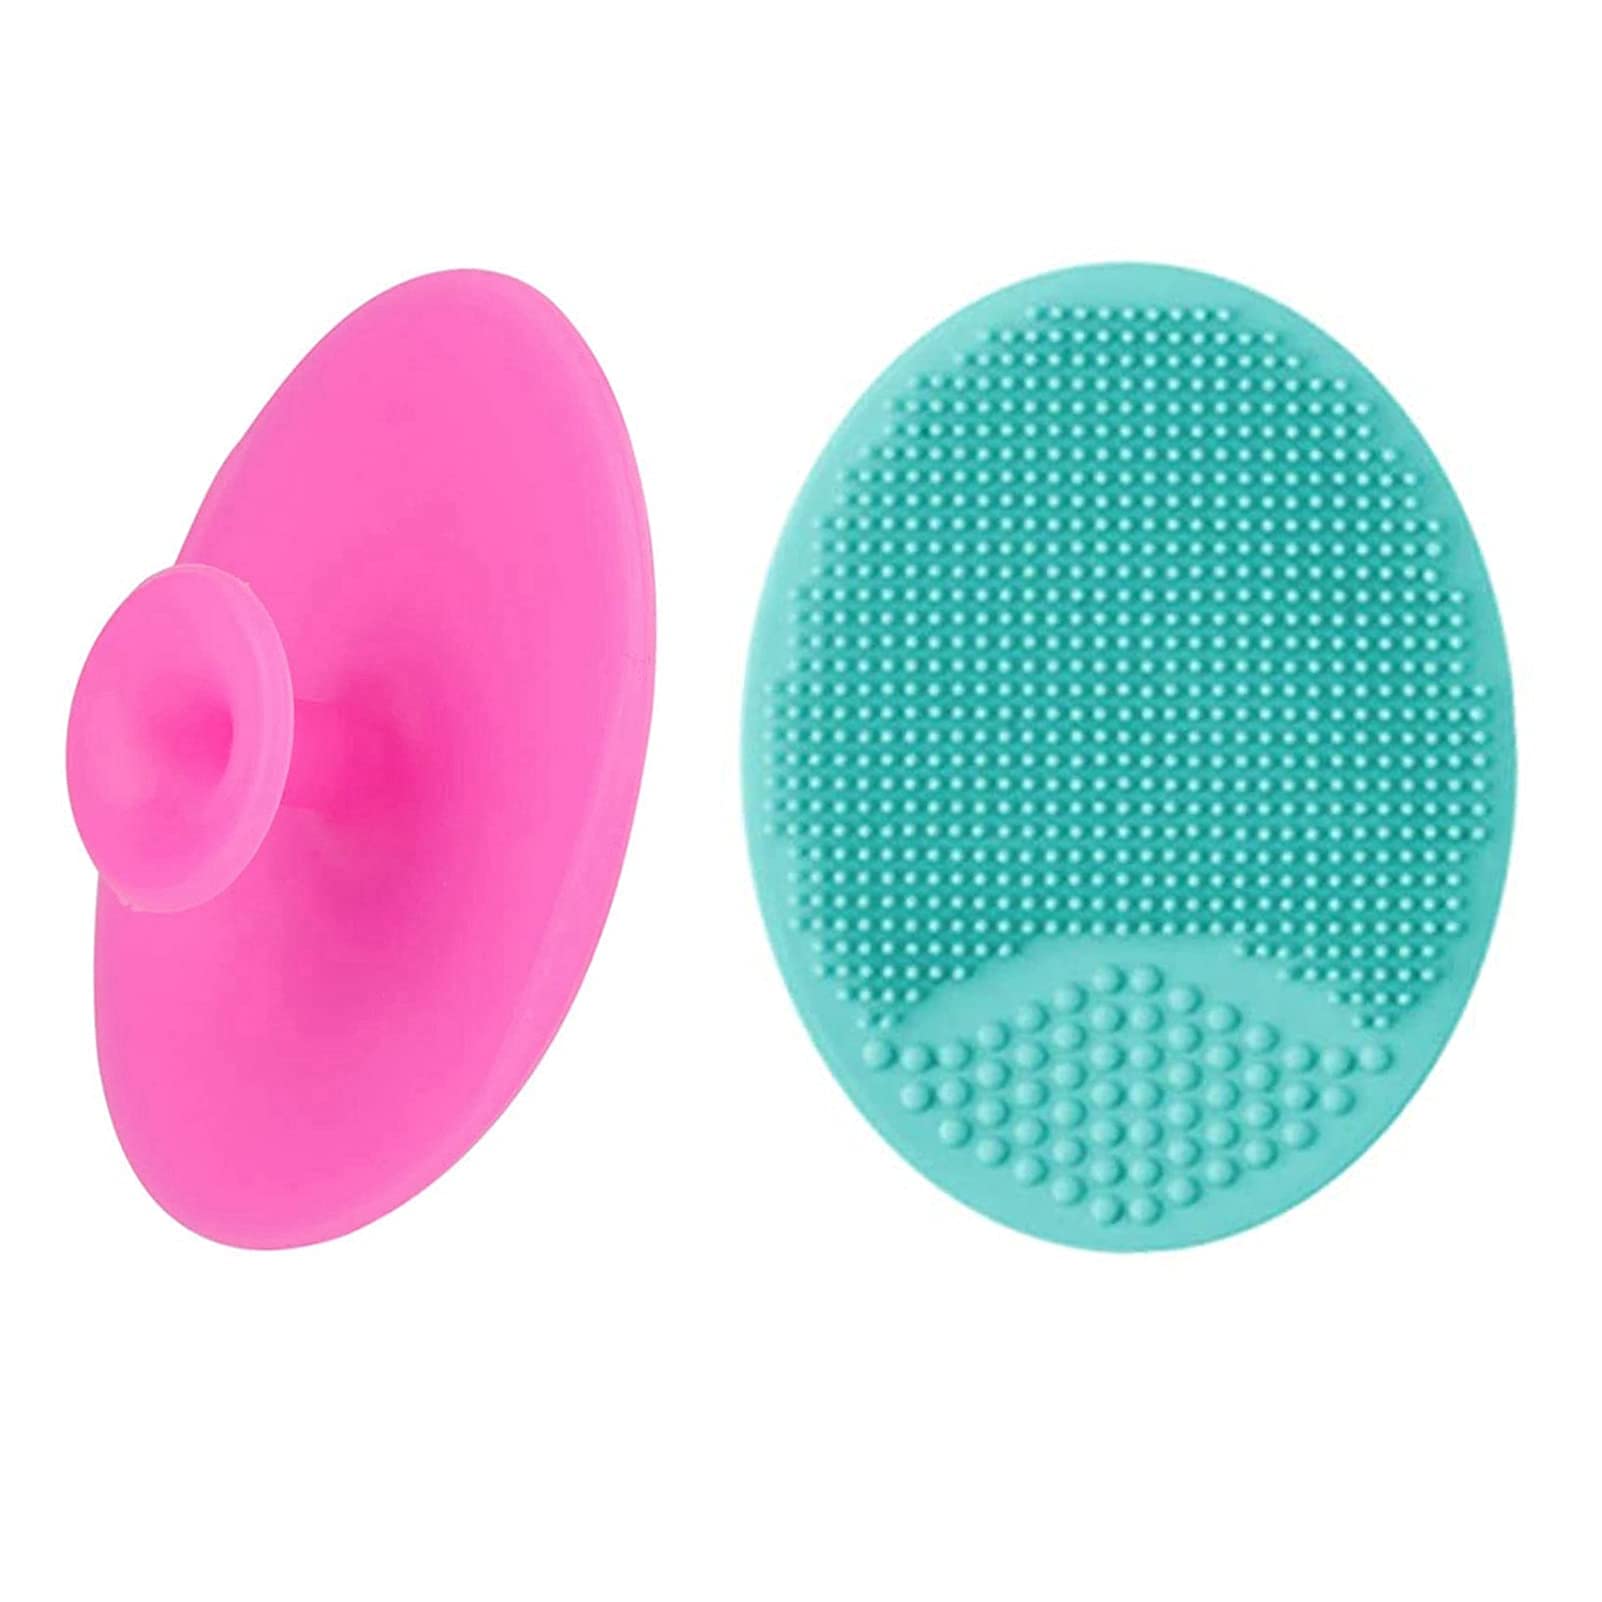 Facial Cleansing Brush Silicone Face Massager Brush Face Scrub Pads for Exfoliating, Anti-Aging Skin Cleanser and Deep Exfoliator Makeup Tool for All Skin Types (FB-2)